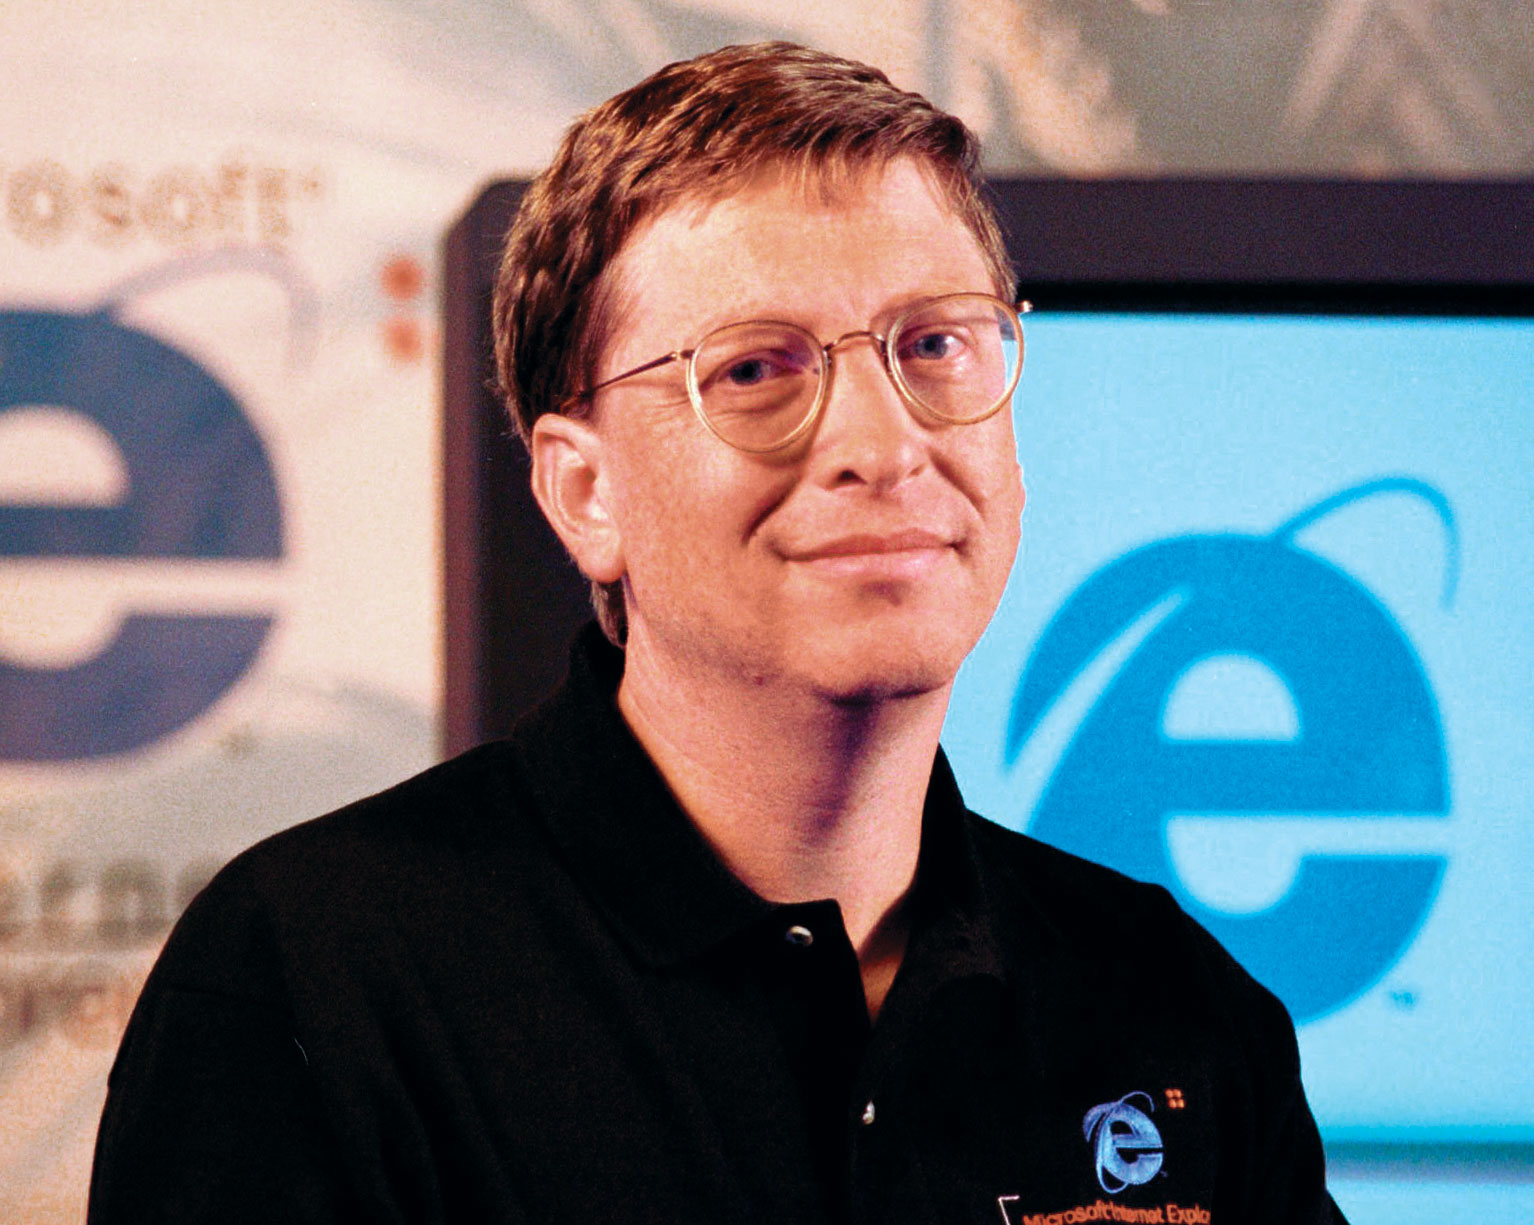 Bill Gates 21 Wallpaper Background Hd With Resolutions 15341225 1534x1225